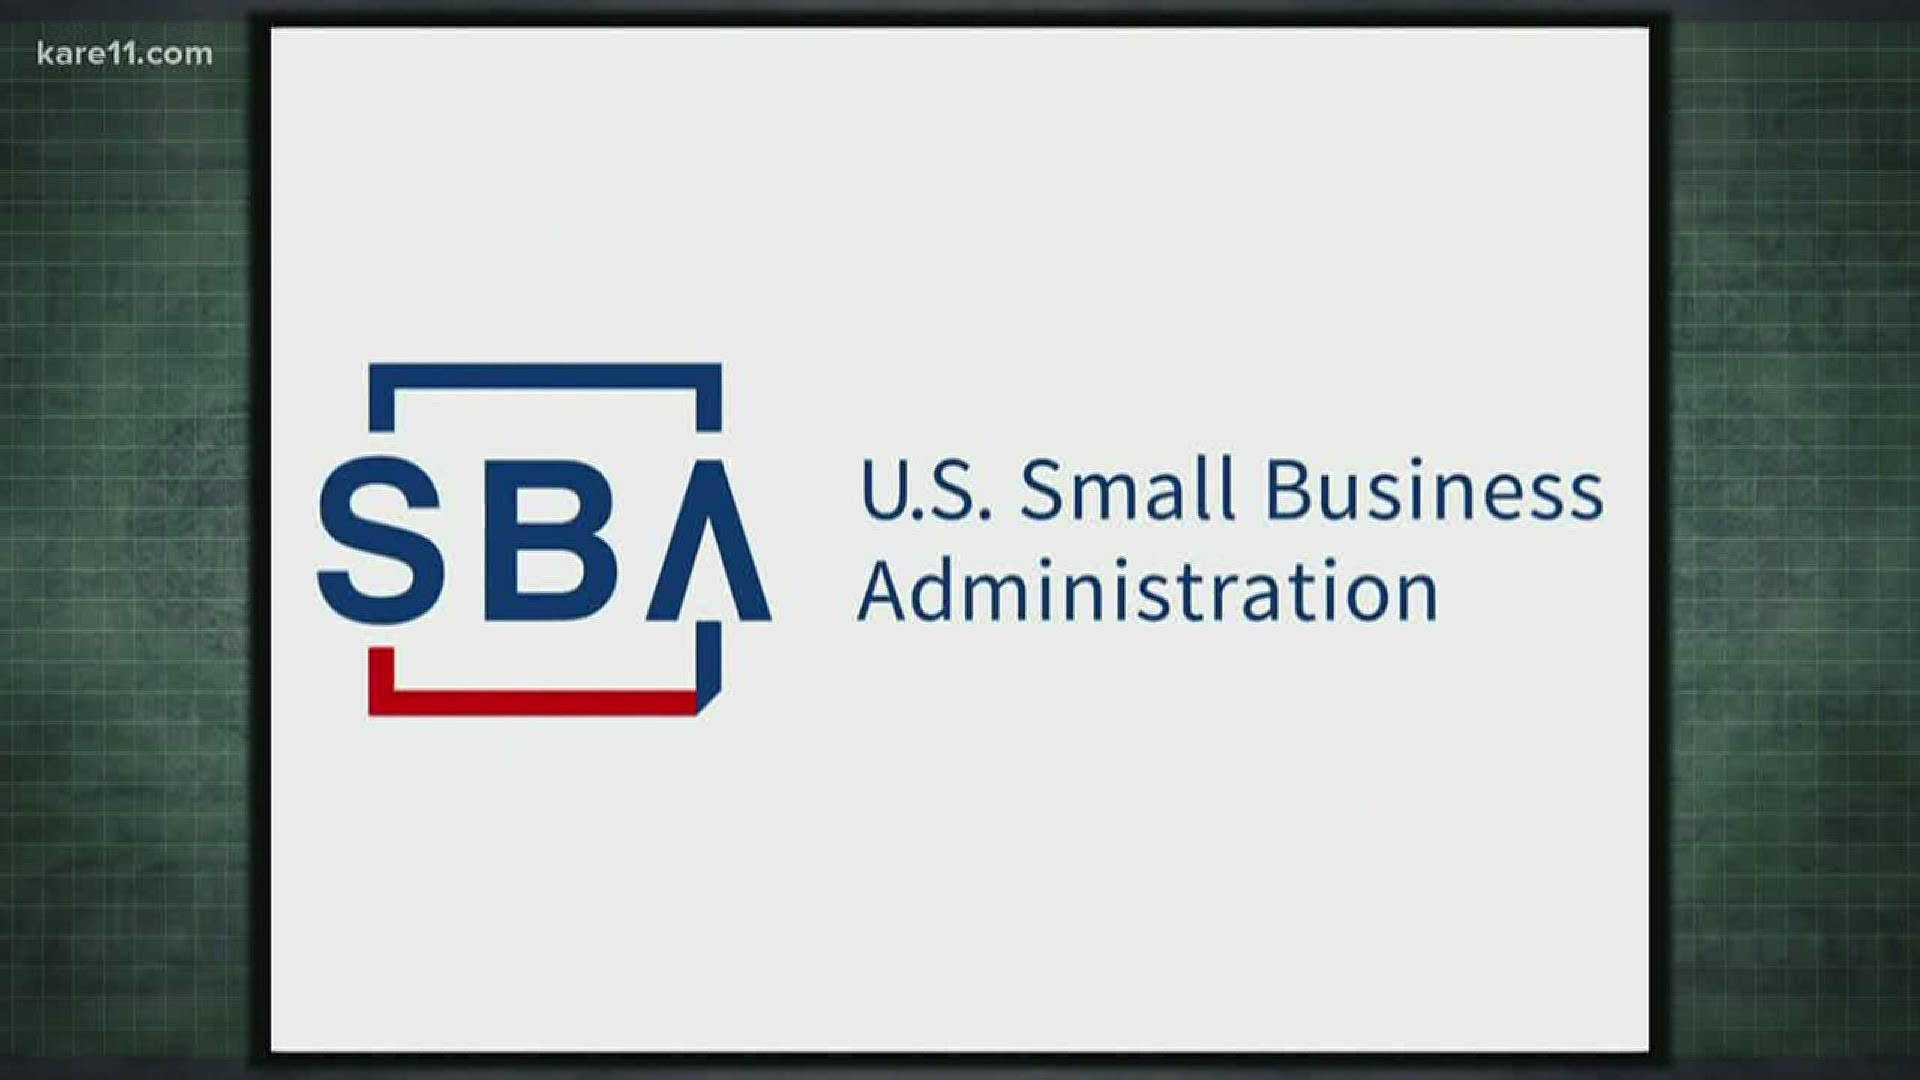 KARE 11 Investigates: Some small businesses shut out of SBA loans